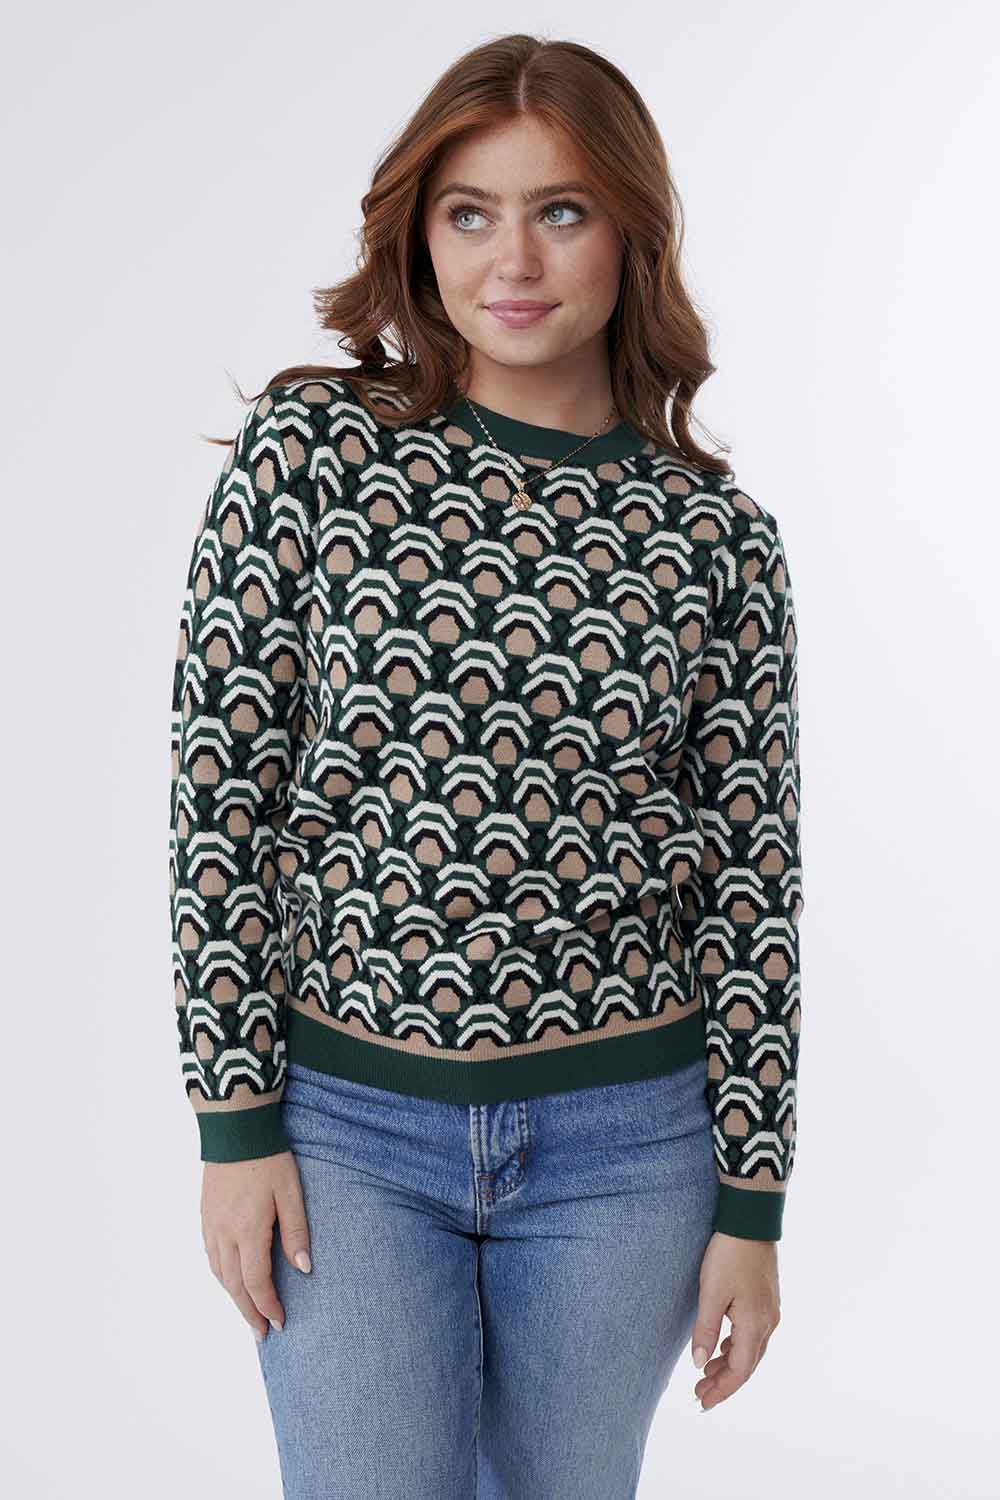 Olive Printed Sweater Top